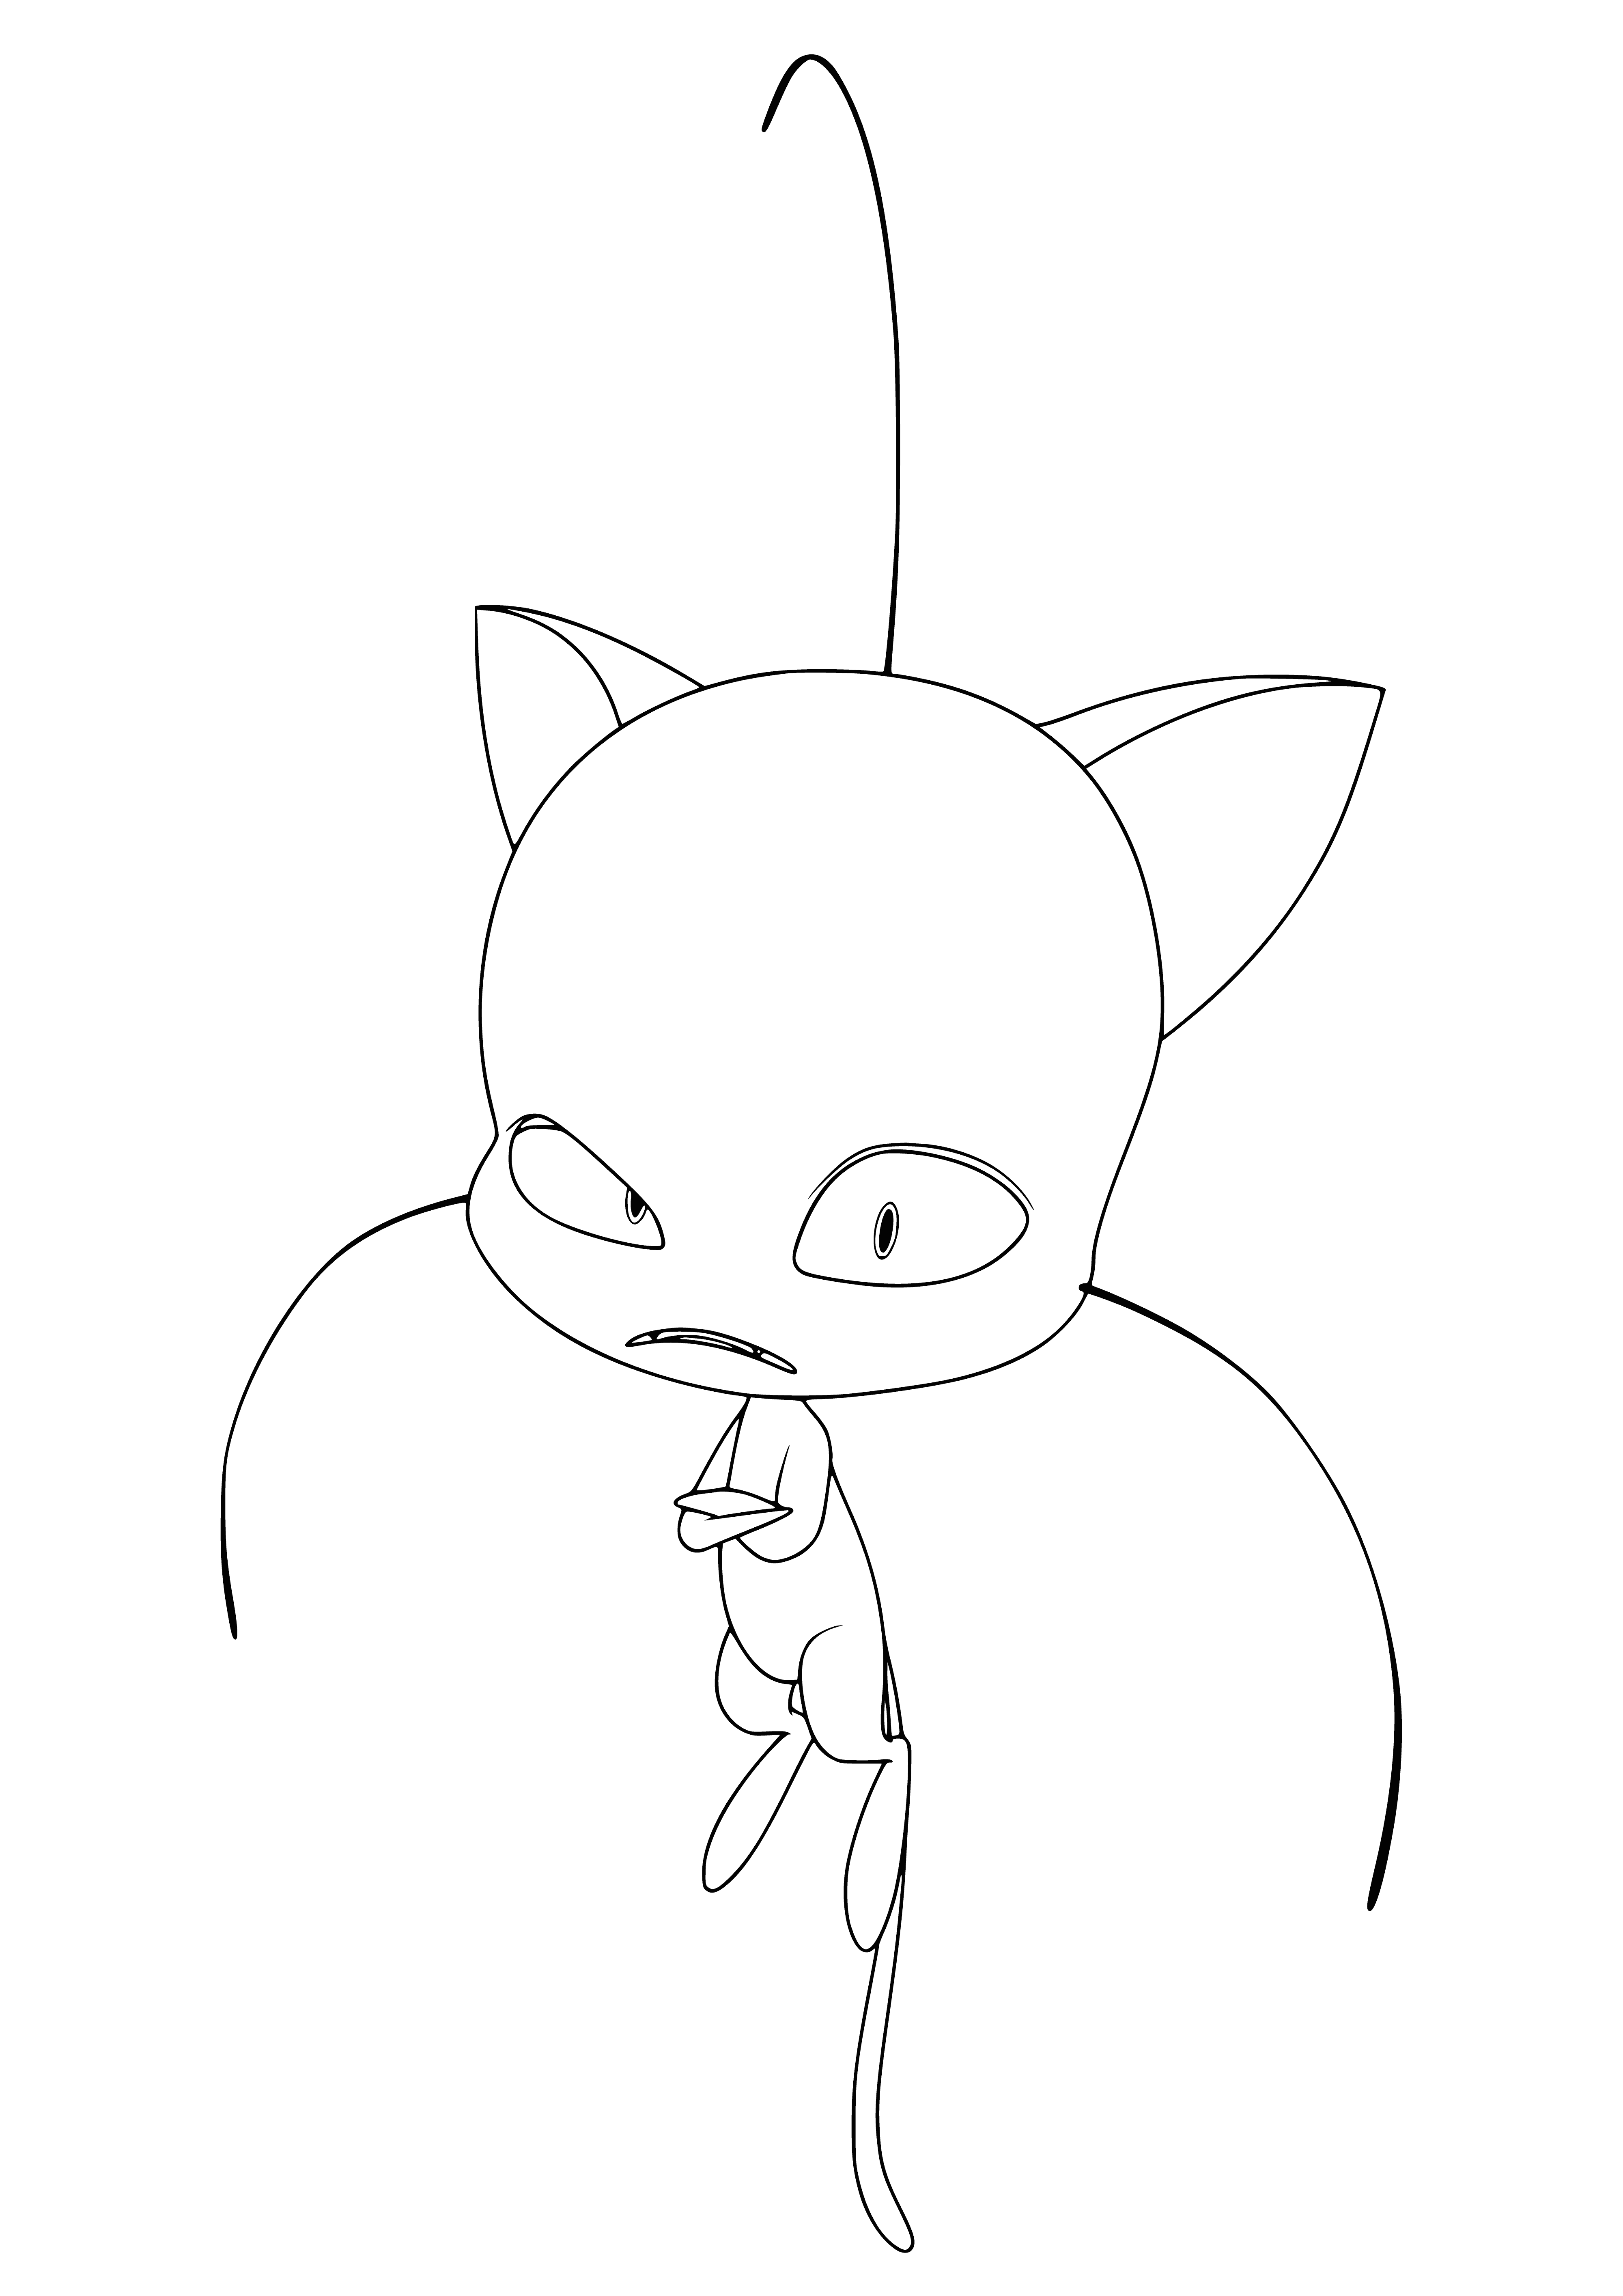 Plagg is Kwami Adriana coloring page